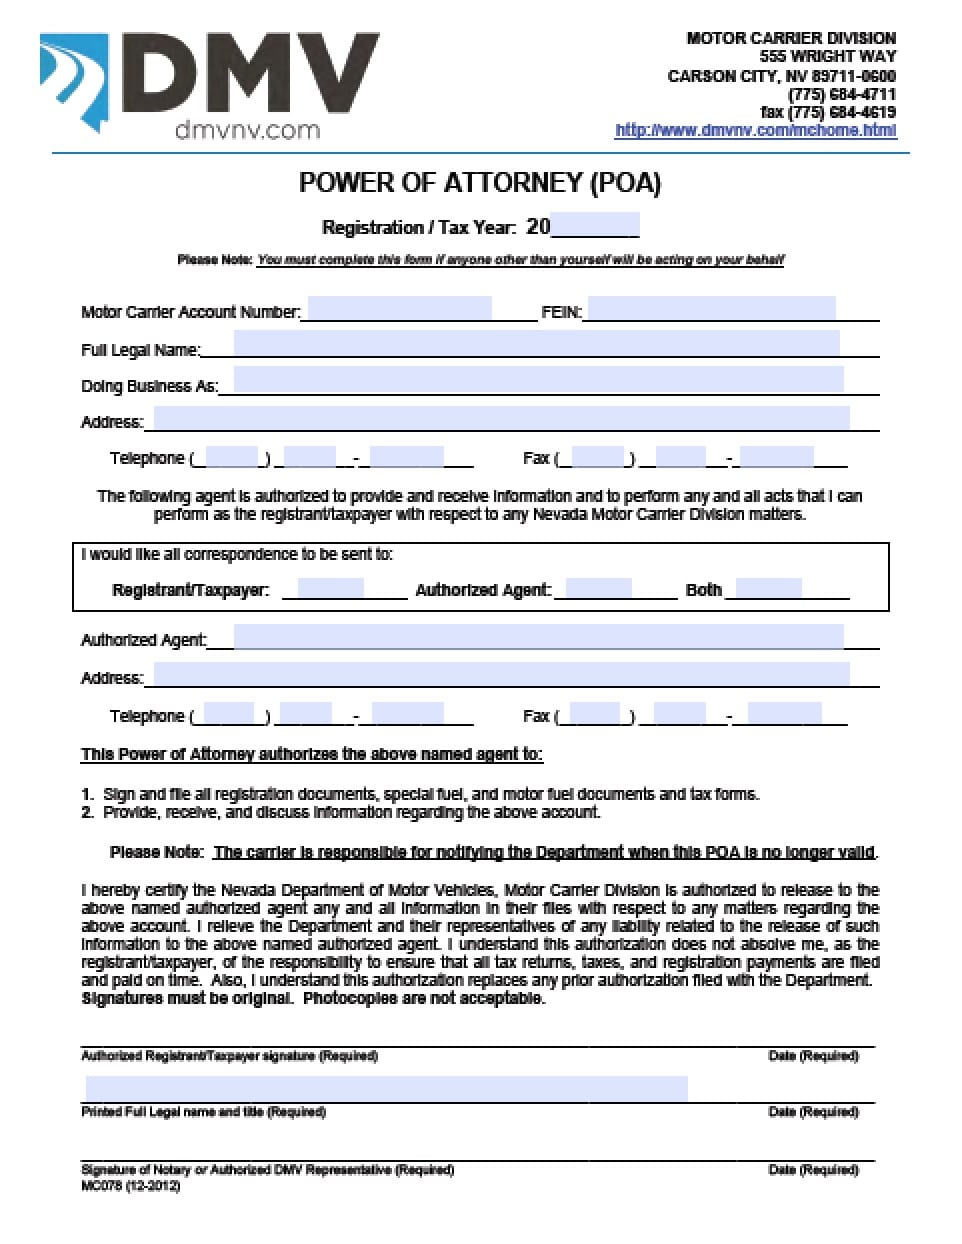 Nevada Medical Power Of Attorney Form Power Of Attorney Power Of Attorney